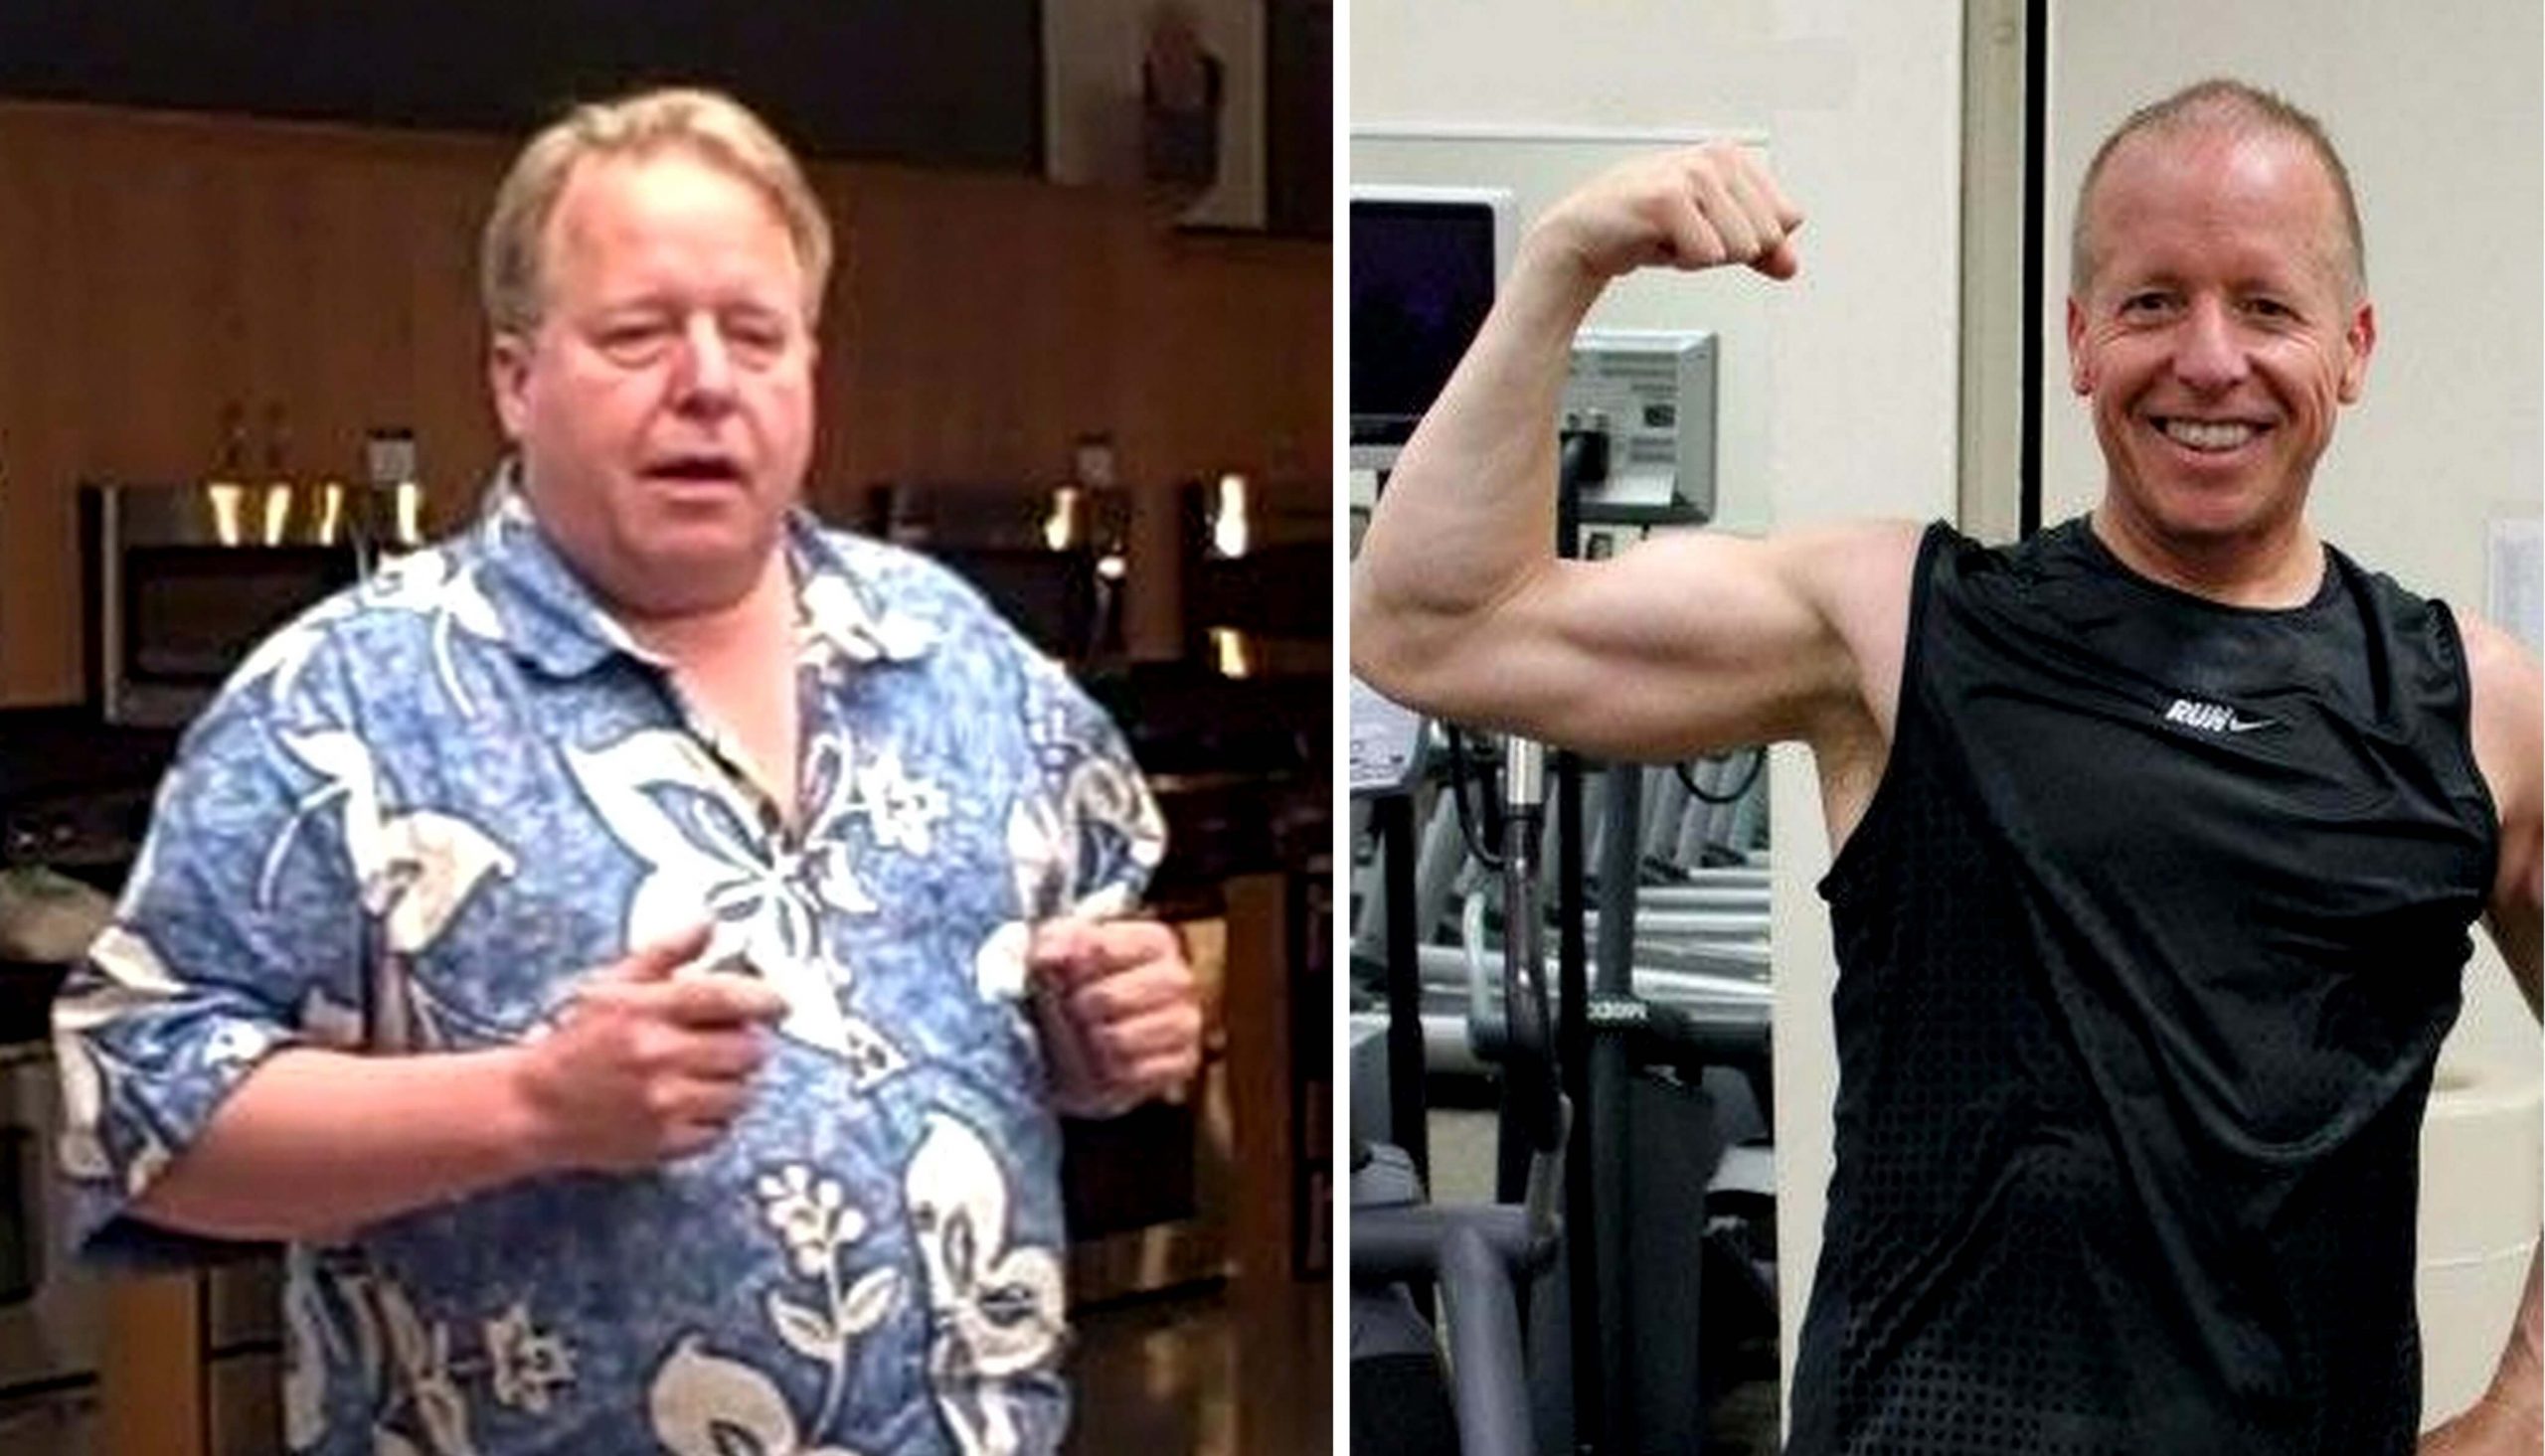 How I Lost 140 Pounds and Cured My Type 2 Diabetes